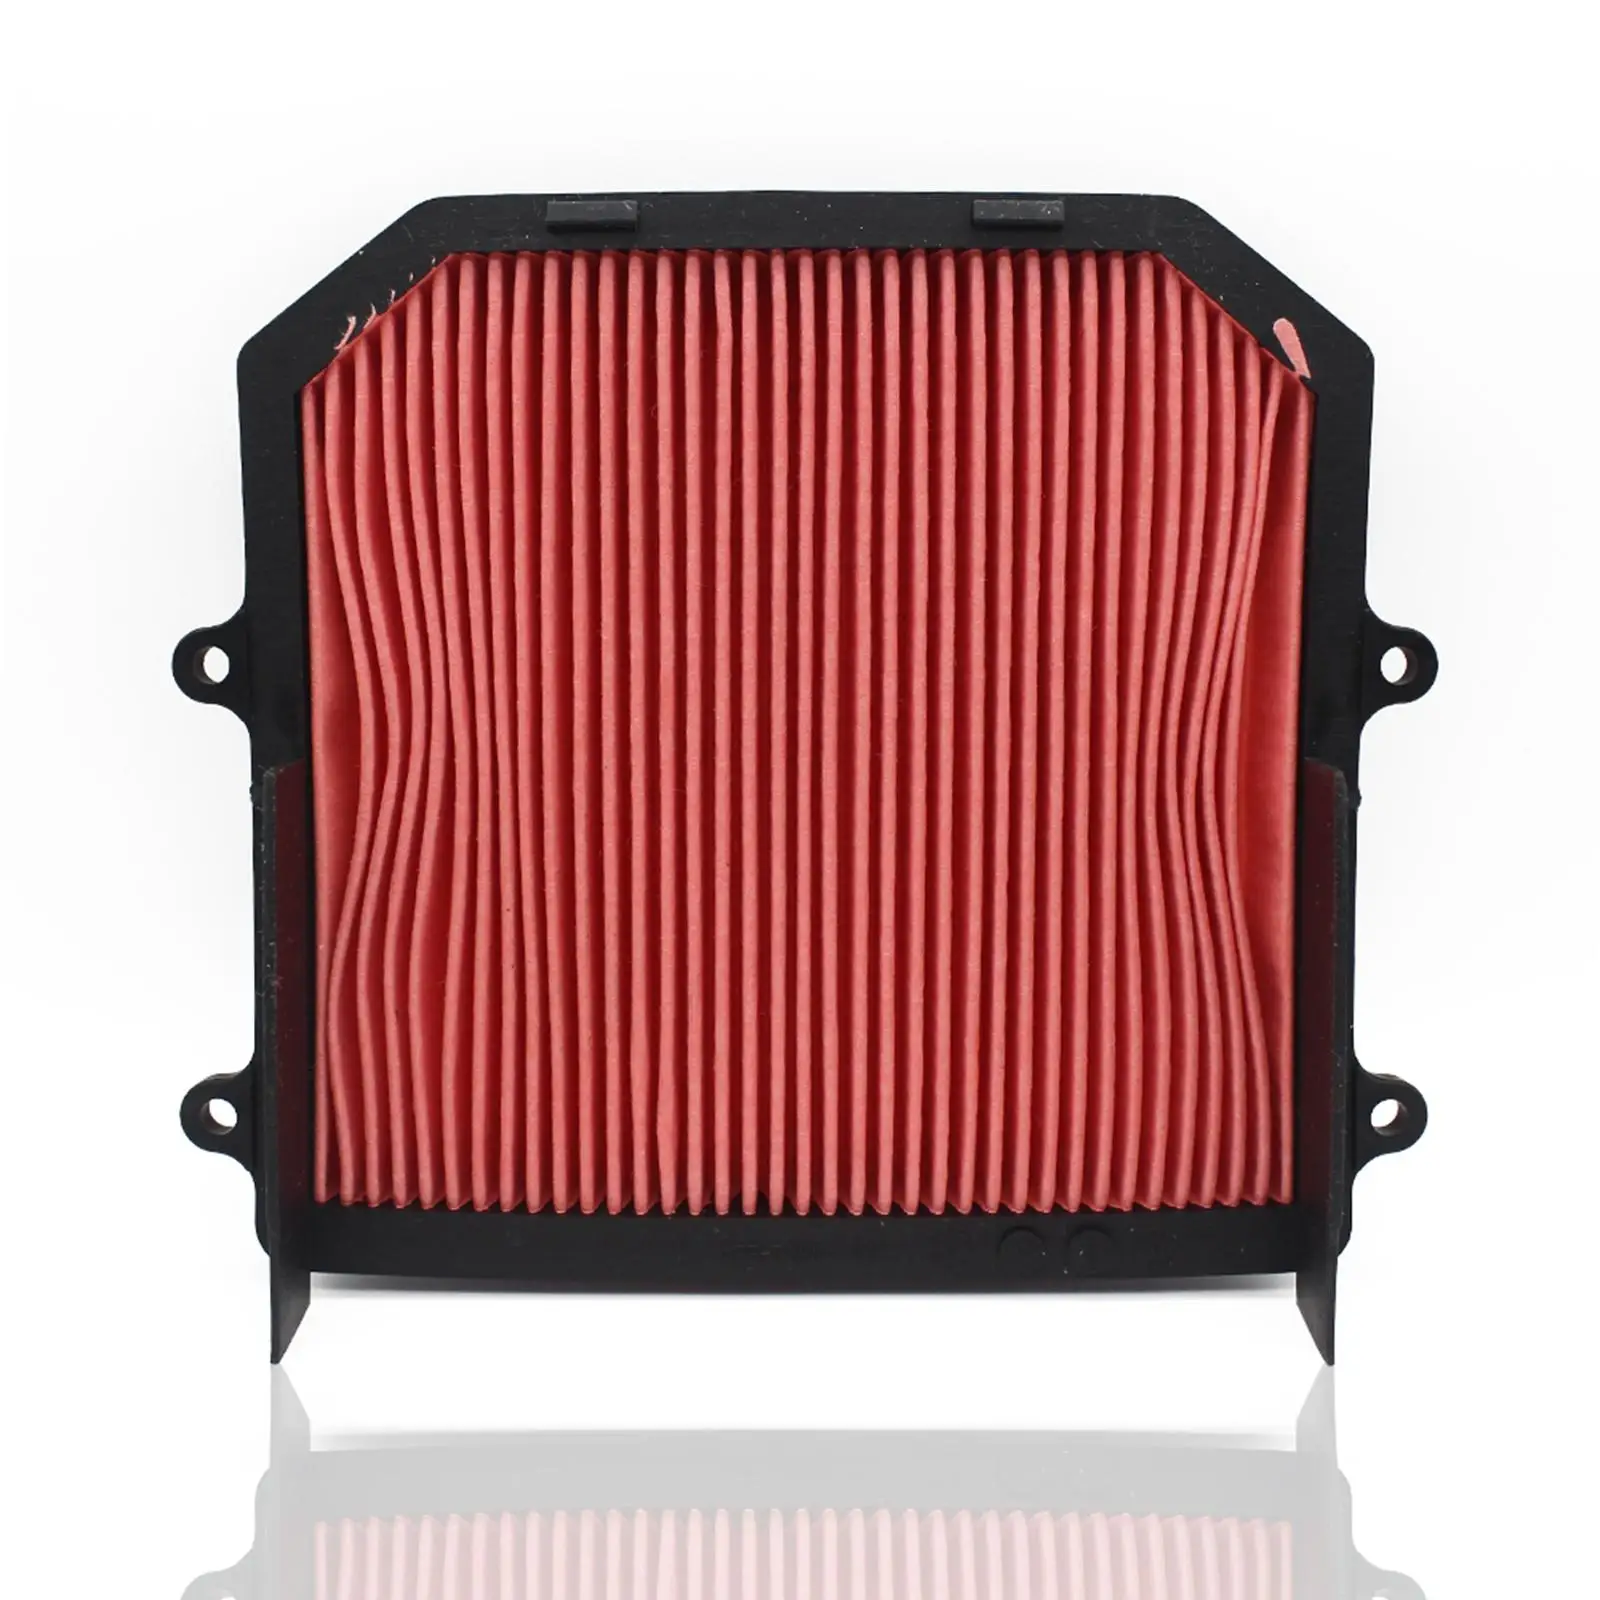 Motorcycle Air Filter Intake Cleaner  Red  Replacement  0V / Xlv1000  2003-2011 Accessories, Moulding